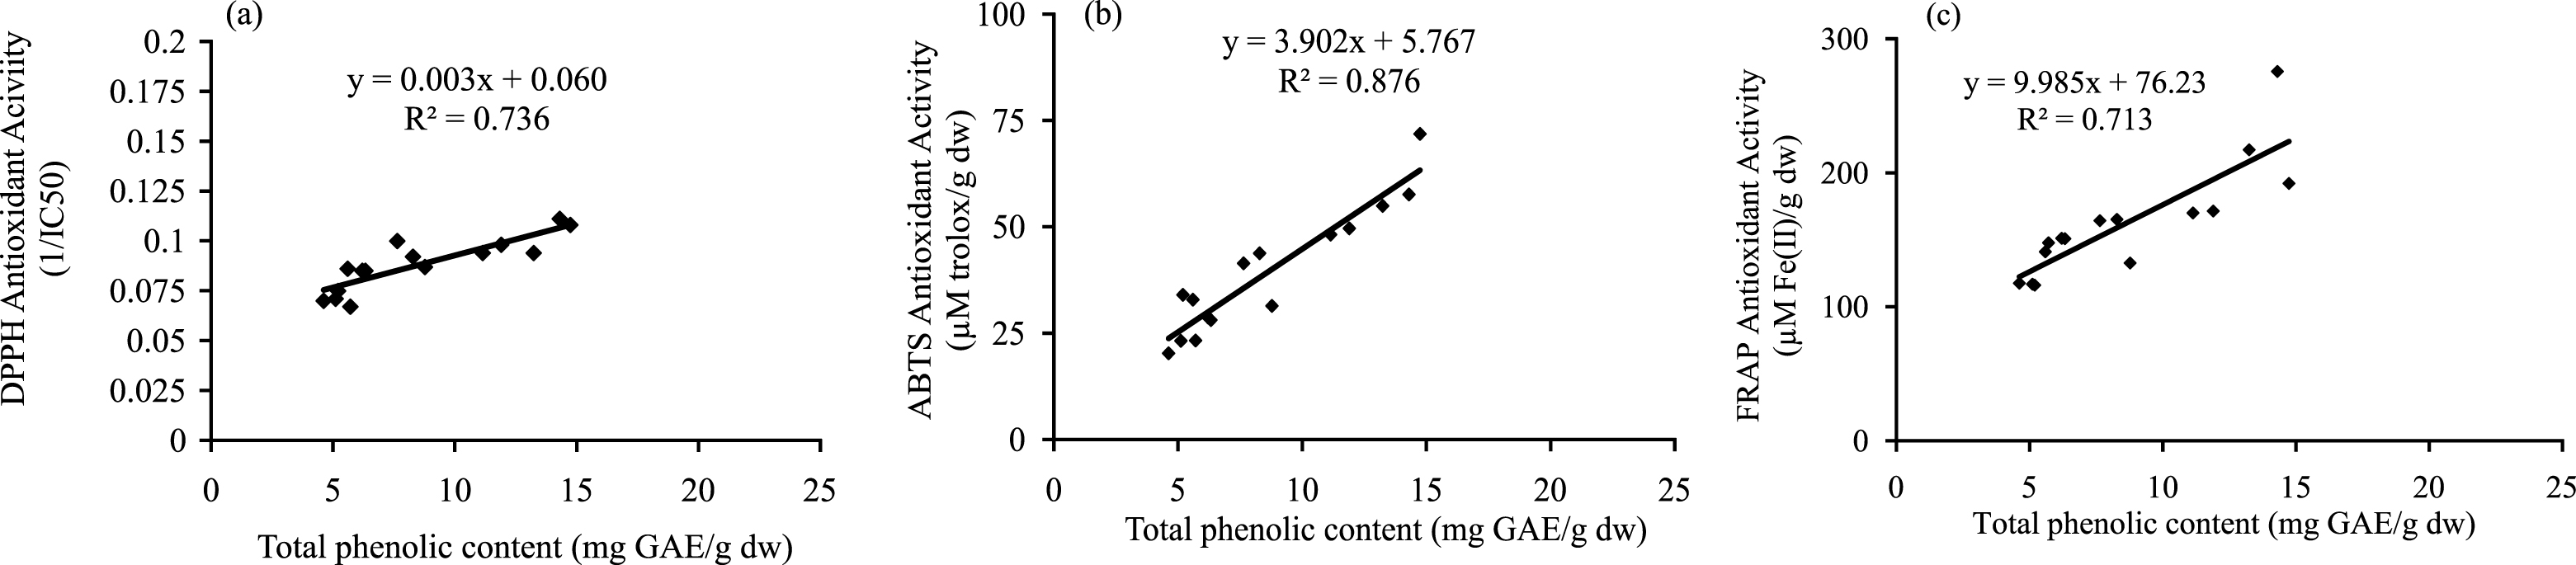 Correlation between total phenolic content antioxidant activity. (a) Total phenolic content and DPPH antioxidant activity (1/IC50). Correlation coefficient R = 0.80 and coefficient of determination R2 = 0.73 (p <  0.05). (b) Total phenolic content and ABTS antioxidant activity (TEAC). Correlation coefficient R = 0.92 and coefficient of determination R2 = 0.87 (p <  0.05). (c) Total phenolic content and FRAP antioxidant activity. Correlation coefficient R = 0.84 and coefficient of determination R2 = 0.71 (p <  0.05).